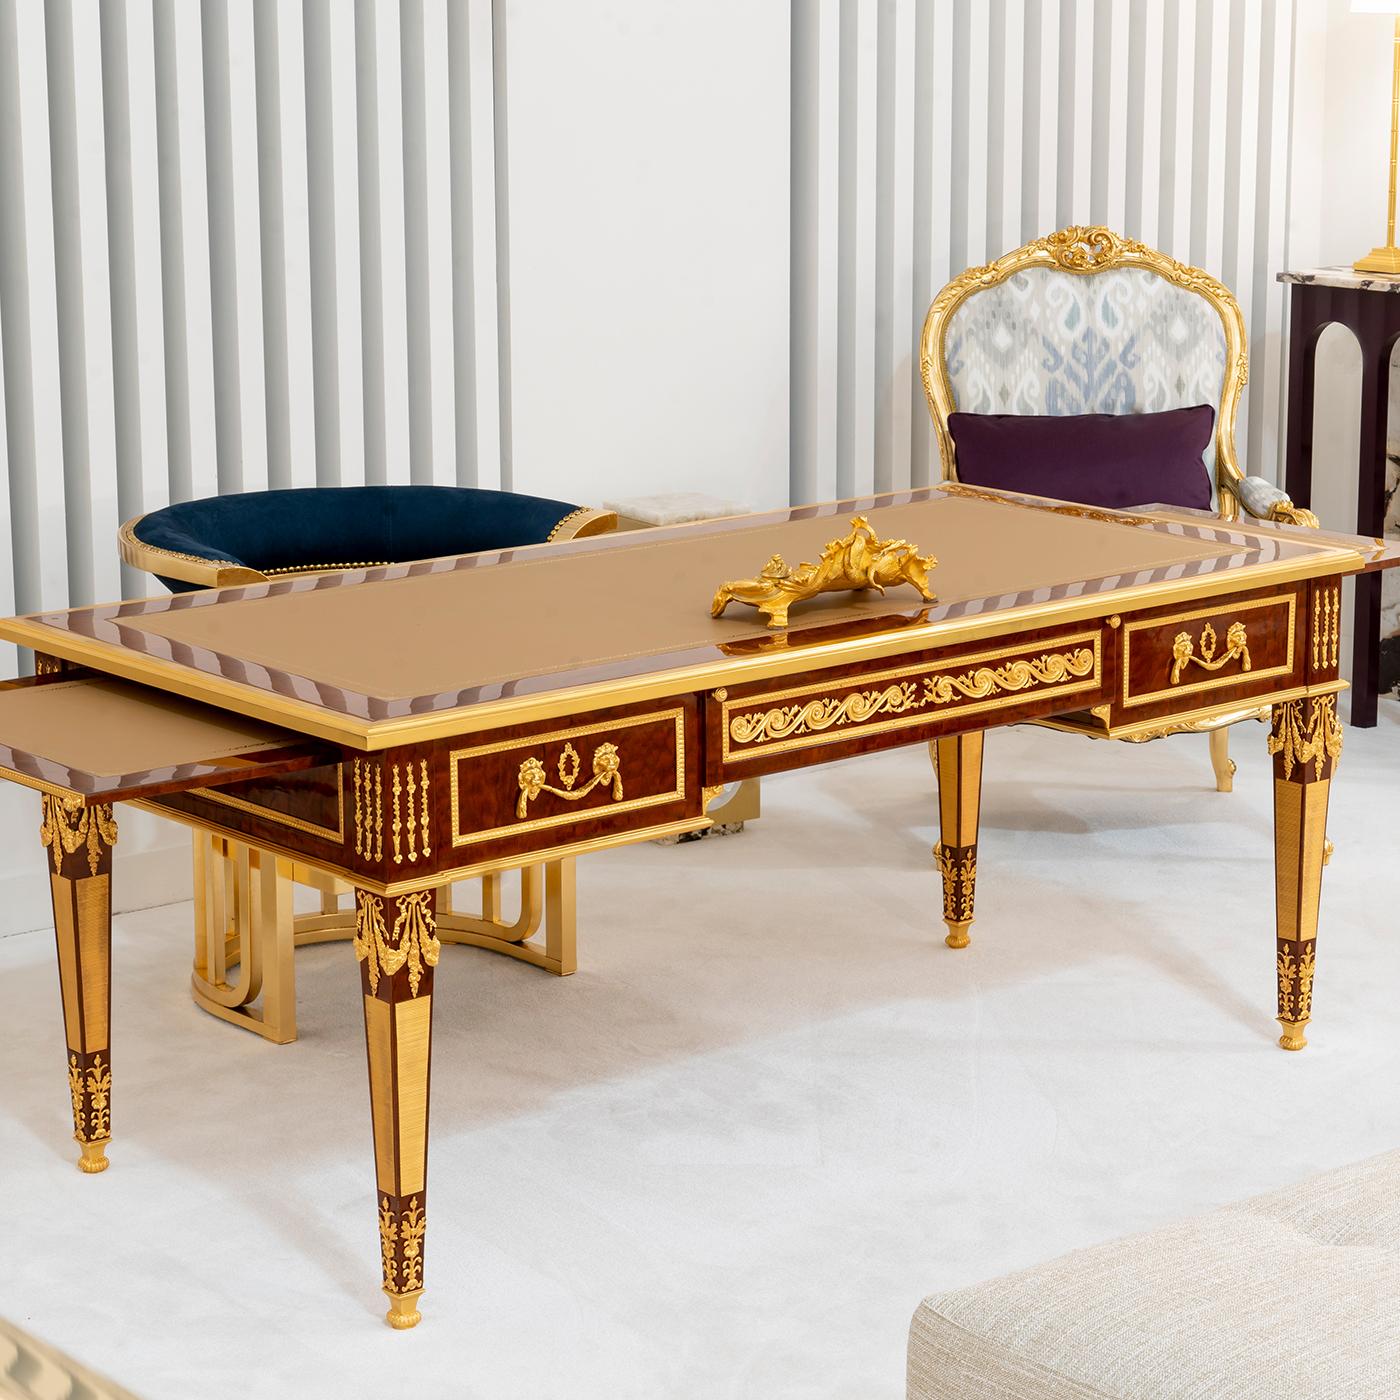 An exclusive Louis XVI-style design of extraordinary refinement, this writing desk will imbue a luxurious allure in a sophisticated interior. Handcrafted of Pomele Mahogany, it is enriched with bronze decorations plated with 24K gold. The top is